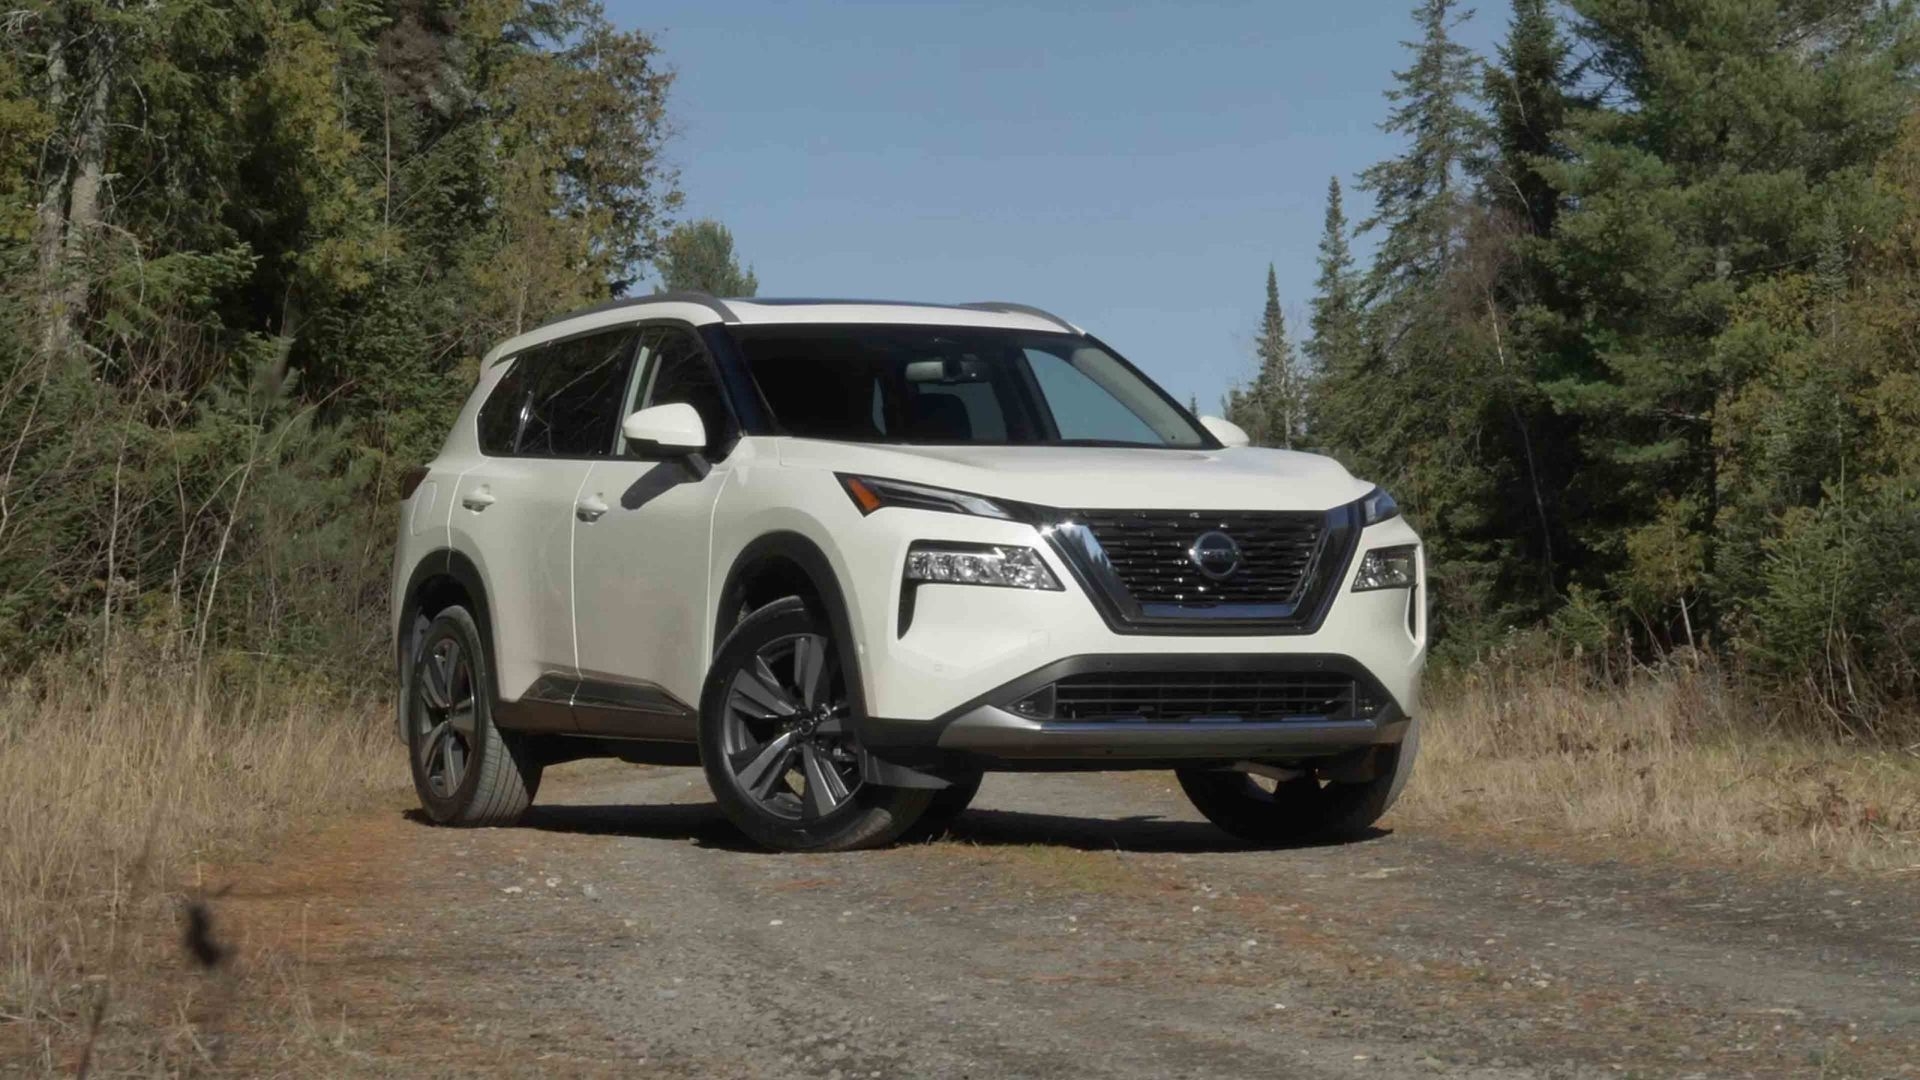 Groupe beaucage nissan article–nissan rogue 2021 1 scaled 1